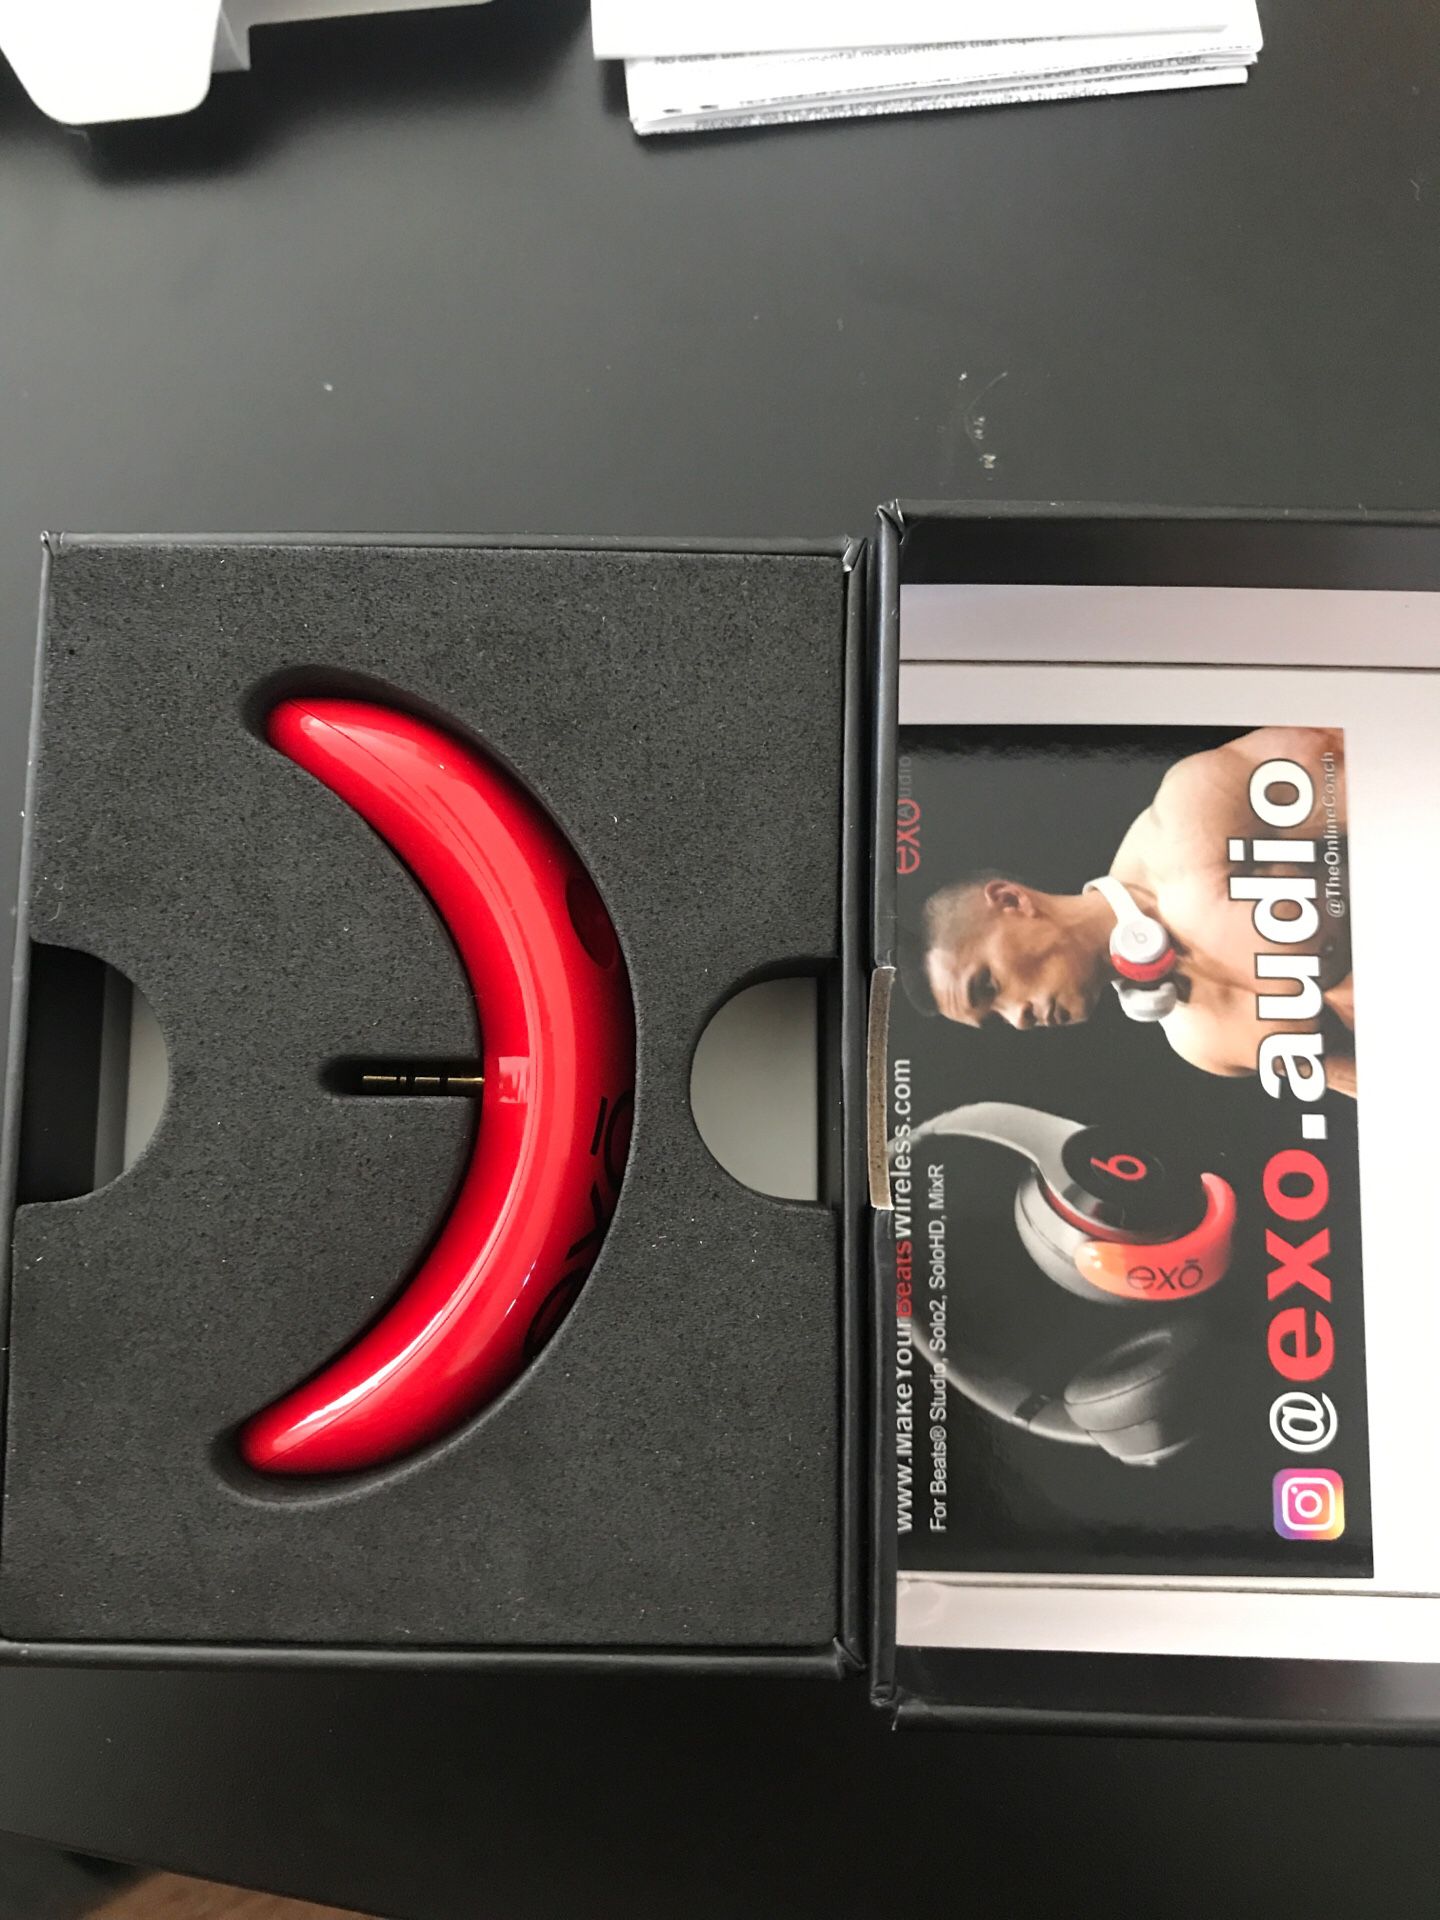 EXO Audio Bluetooth Headphone Adapter for Beats for in FL - OfferUp